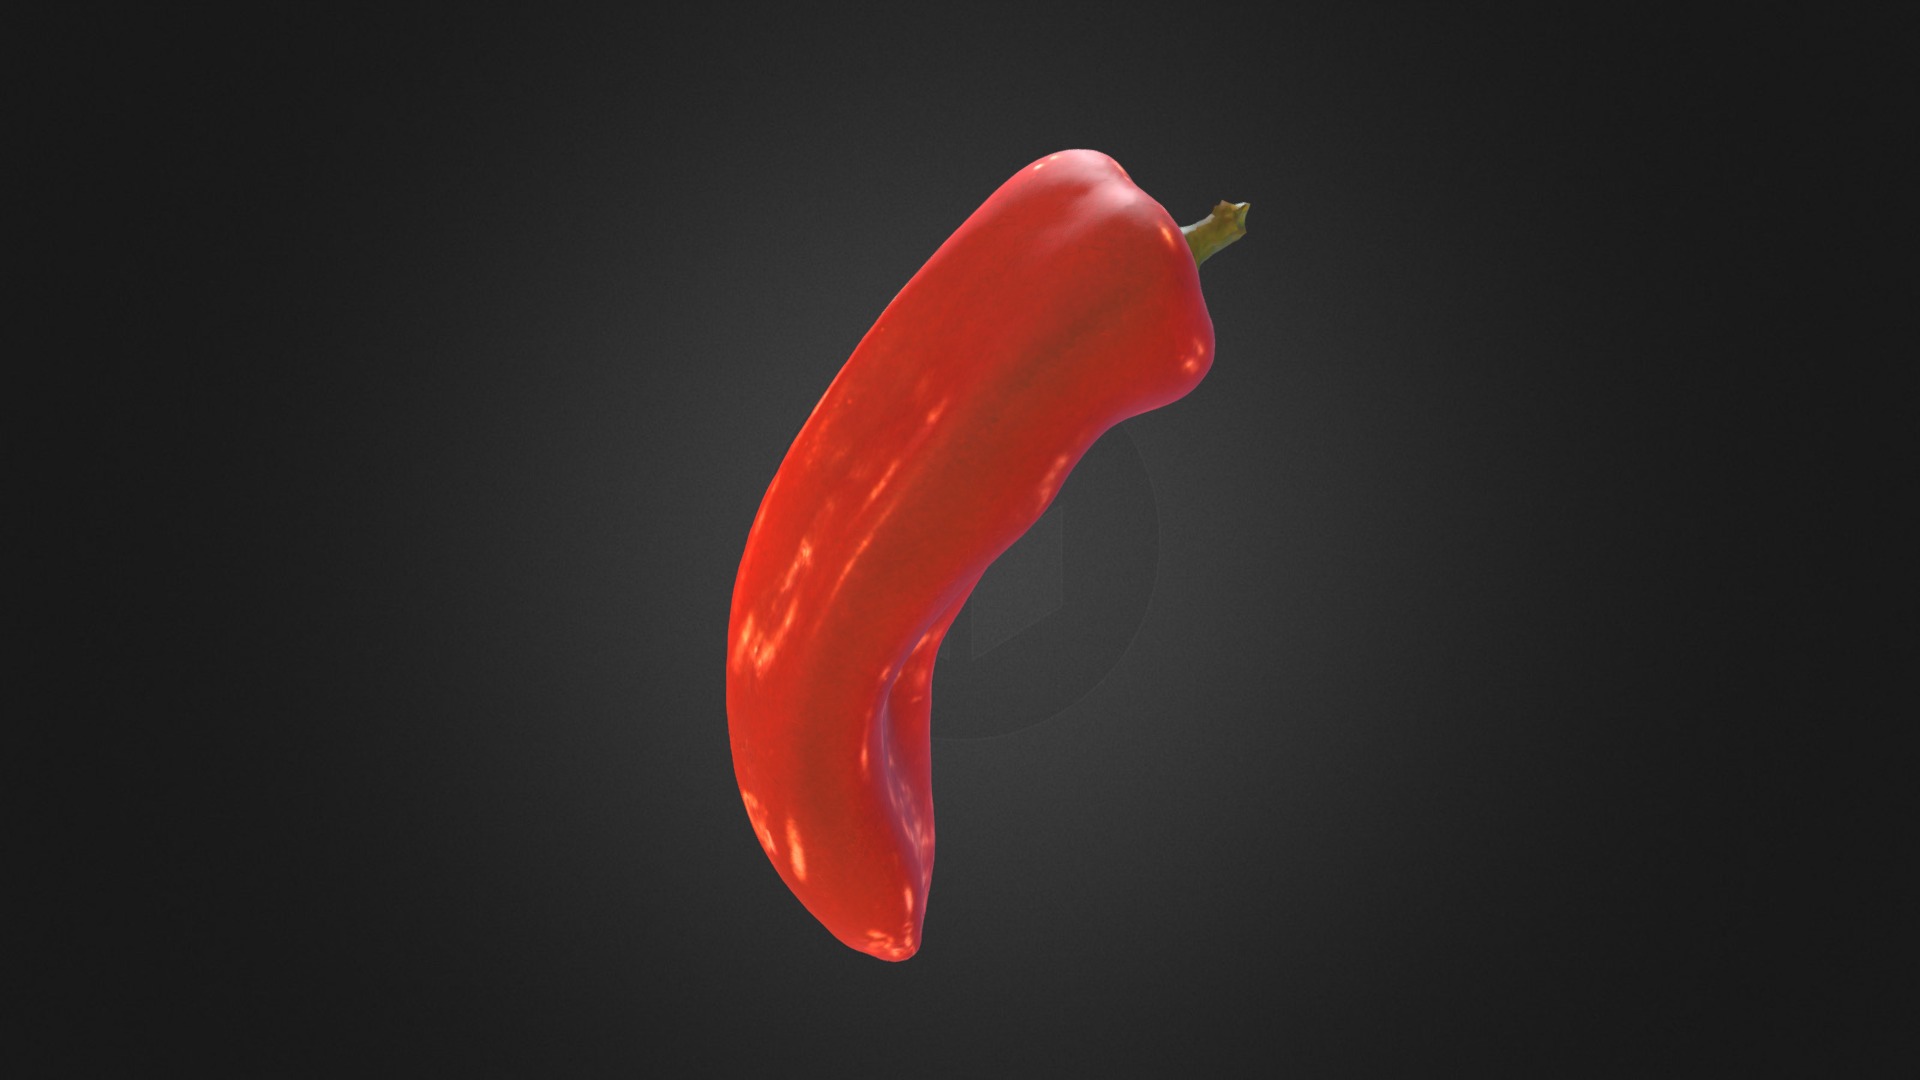 3D model Red Pepper 3d Scan – Artec Spider - This is a 3D model of the Red Pepper 3d Scan - Artec Spider. The 3D model is about a red pepper with a black background.